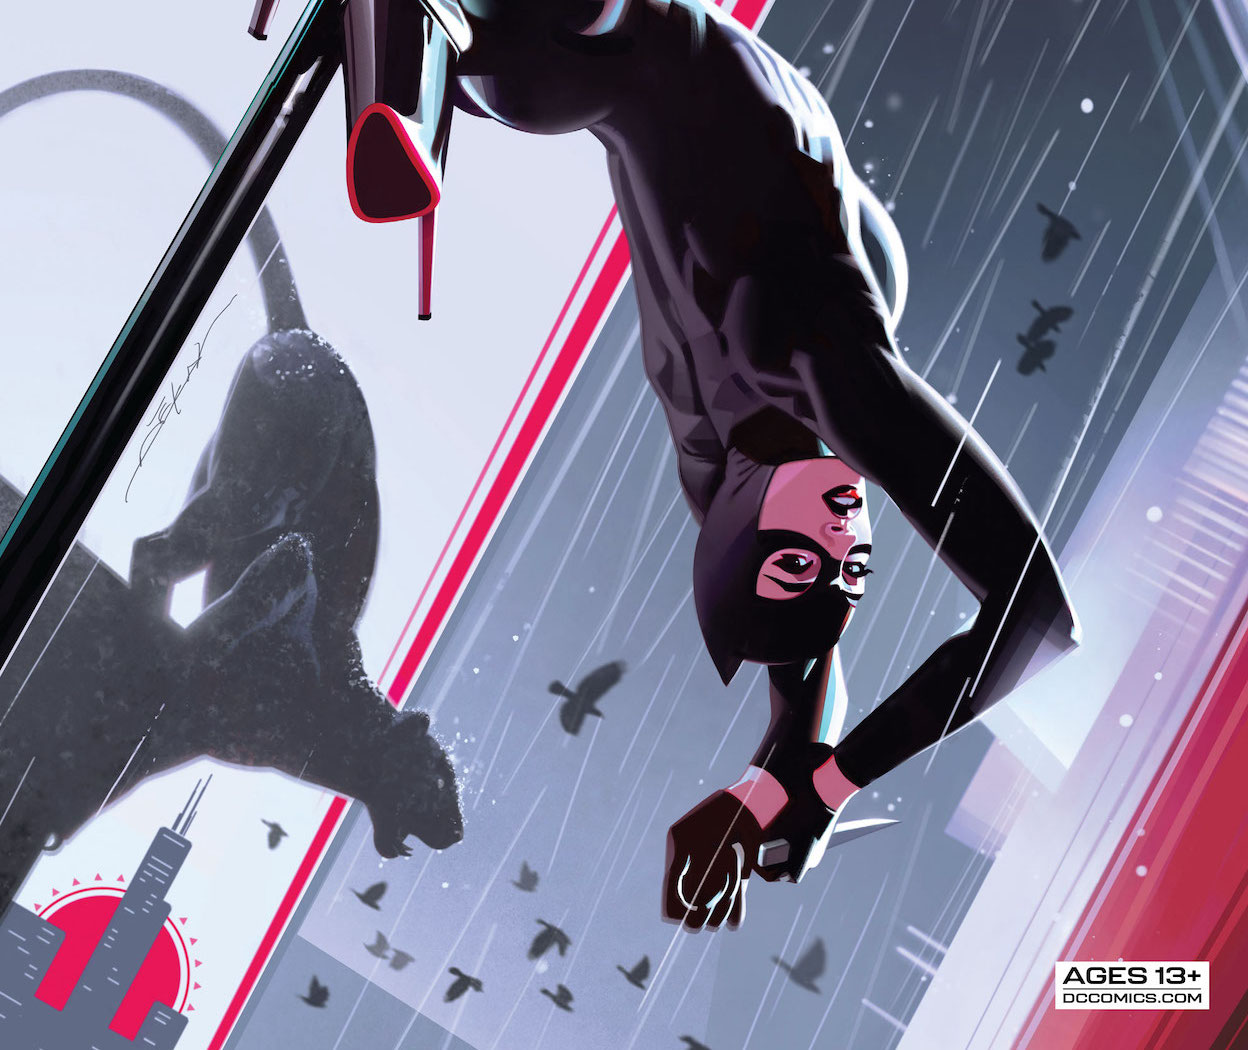 'Catwoman' #39 heads back to Gotham with a new status quo